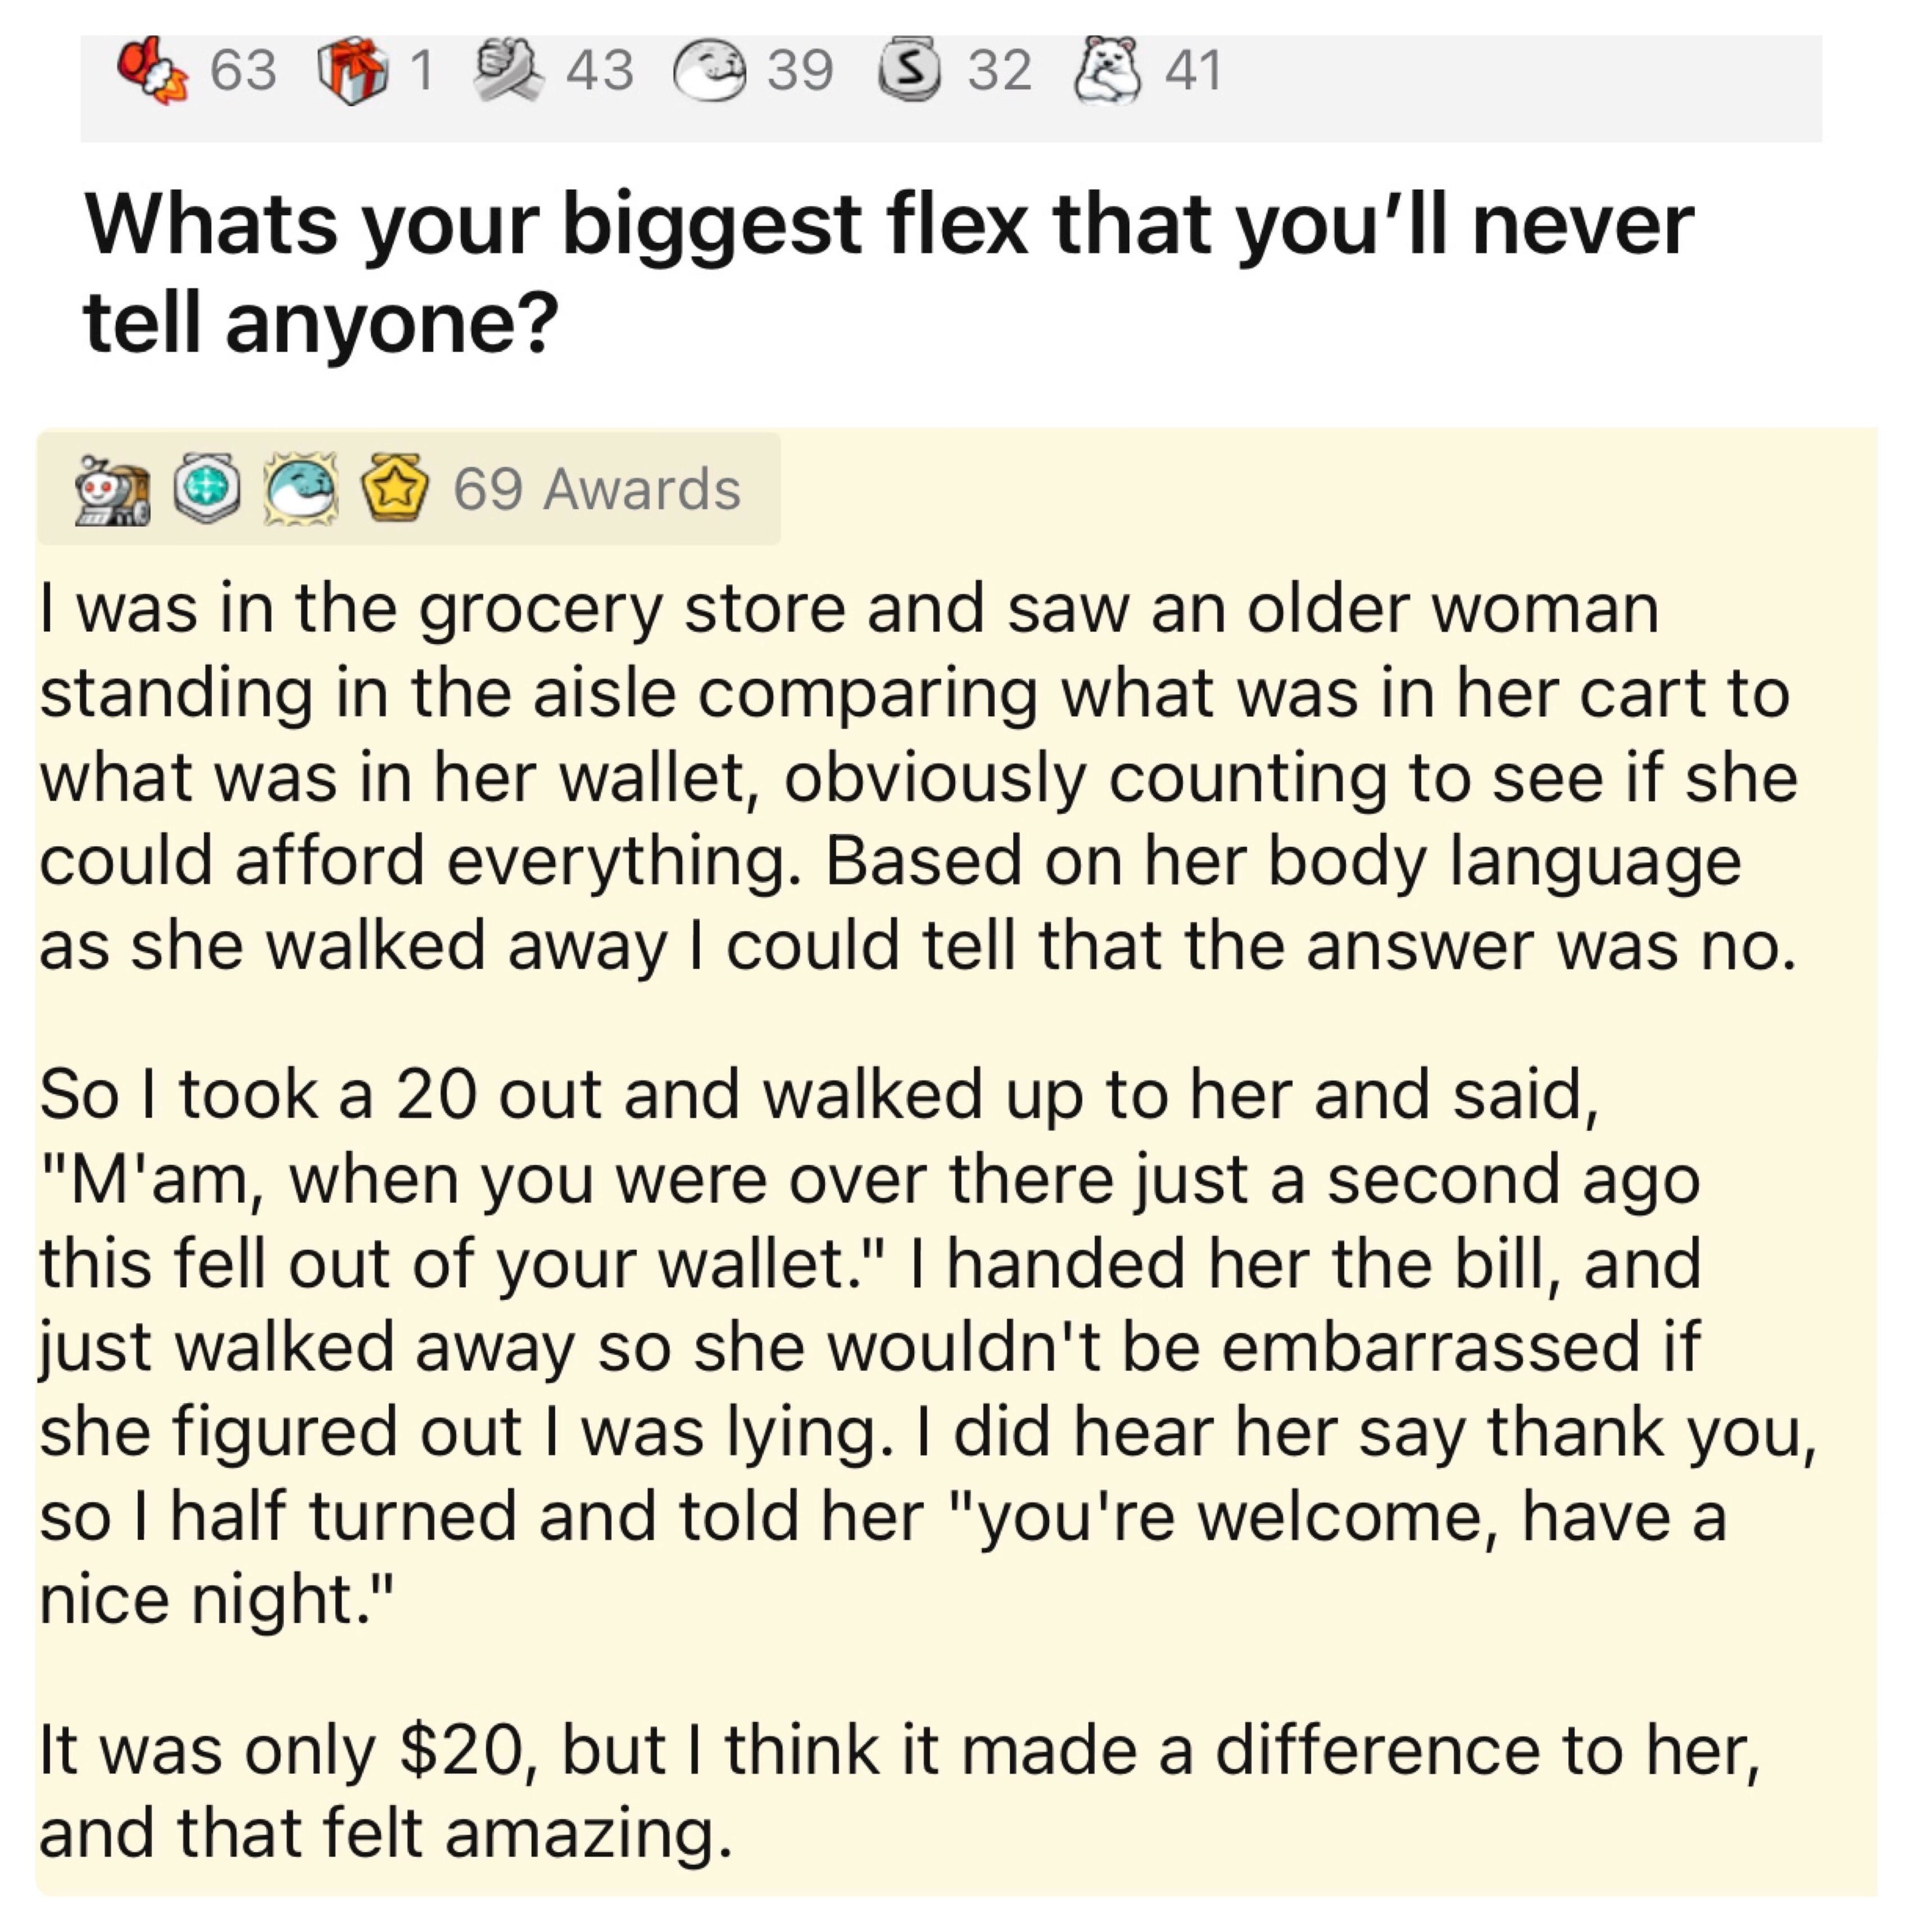 This person&#x27;s biggest flex: They saw an older woman in the grocery store counting her cart contents against what was in her wallet, so they gave her a $20 bill and said &quot;Ma&#x27;am, when you were over there this fell out of your wallet&quot; and walked way